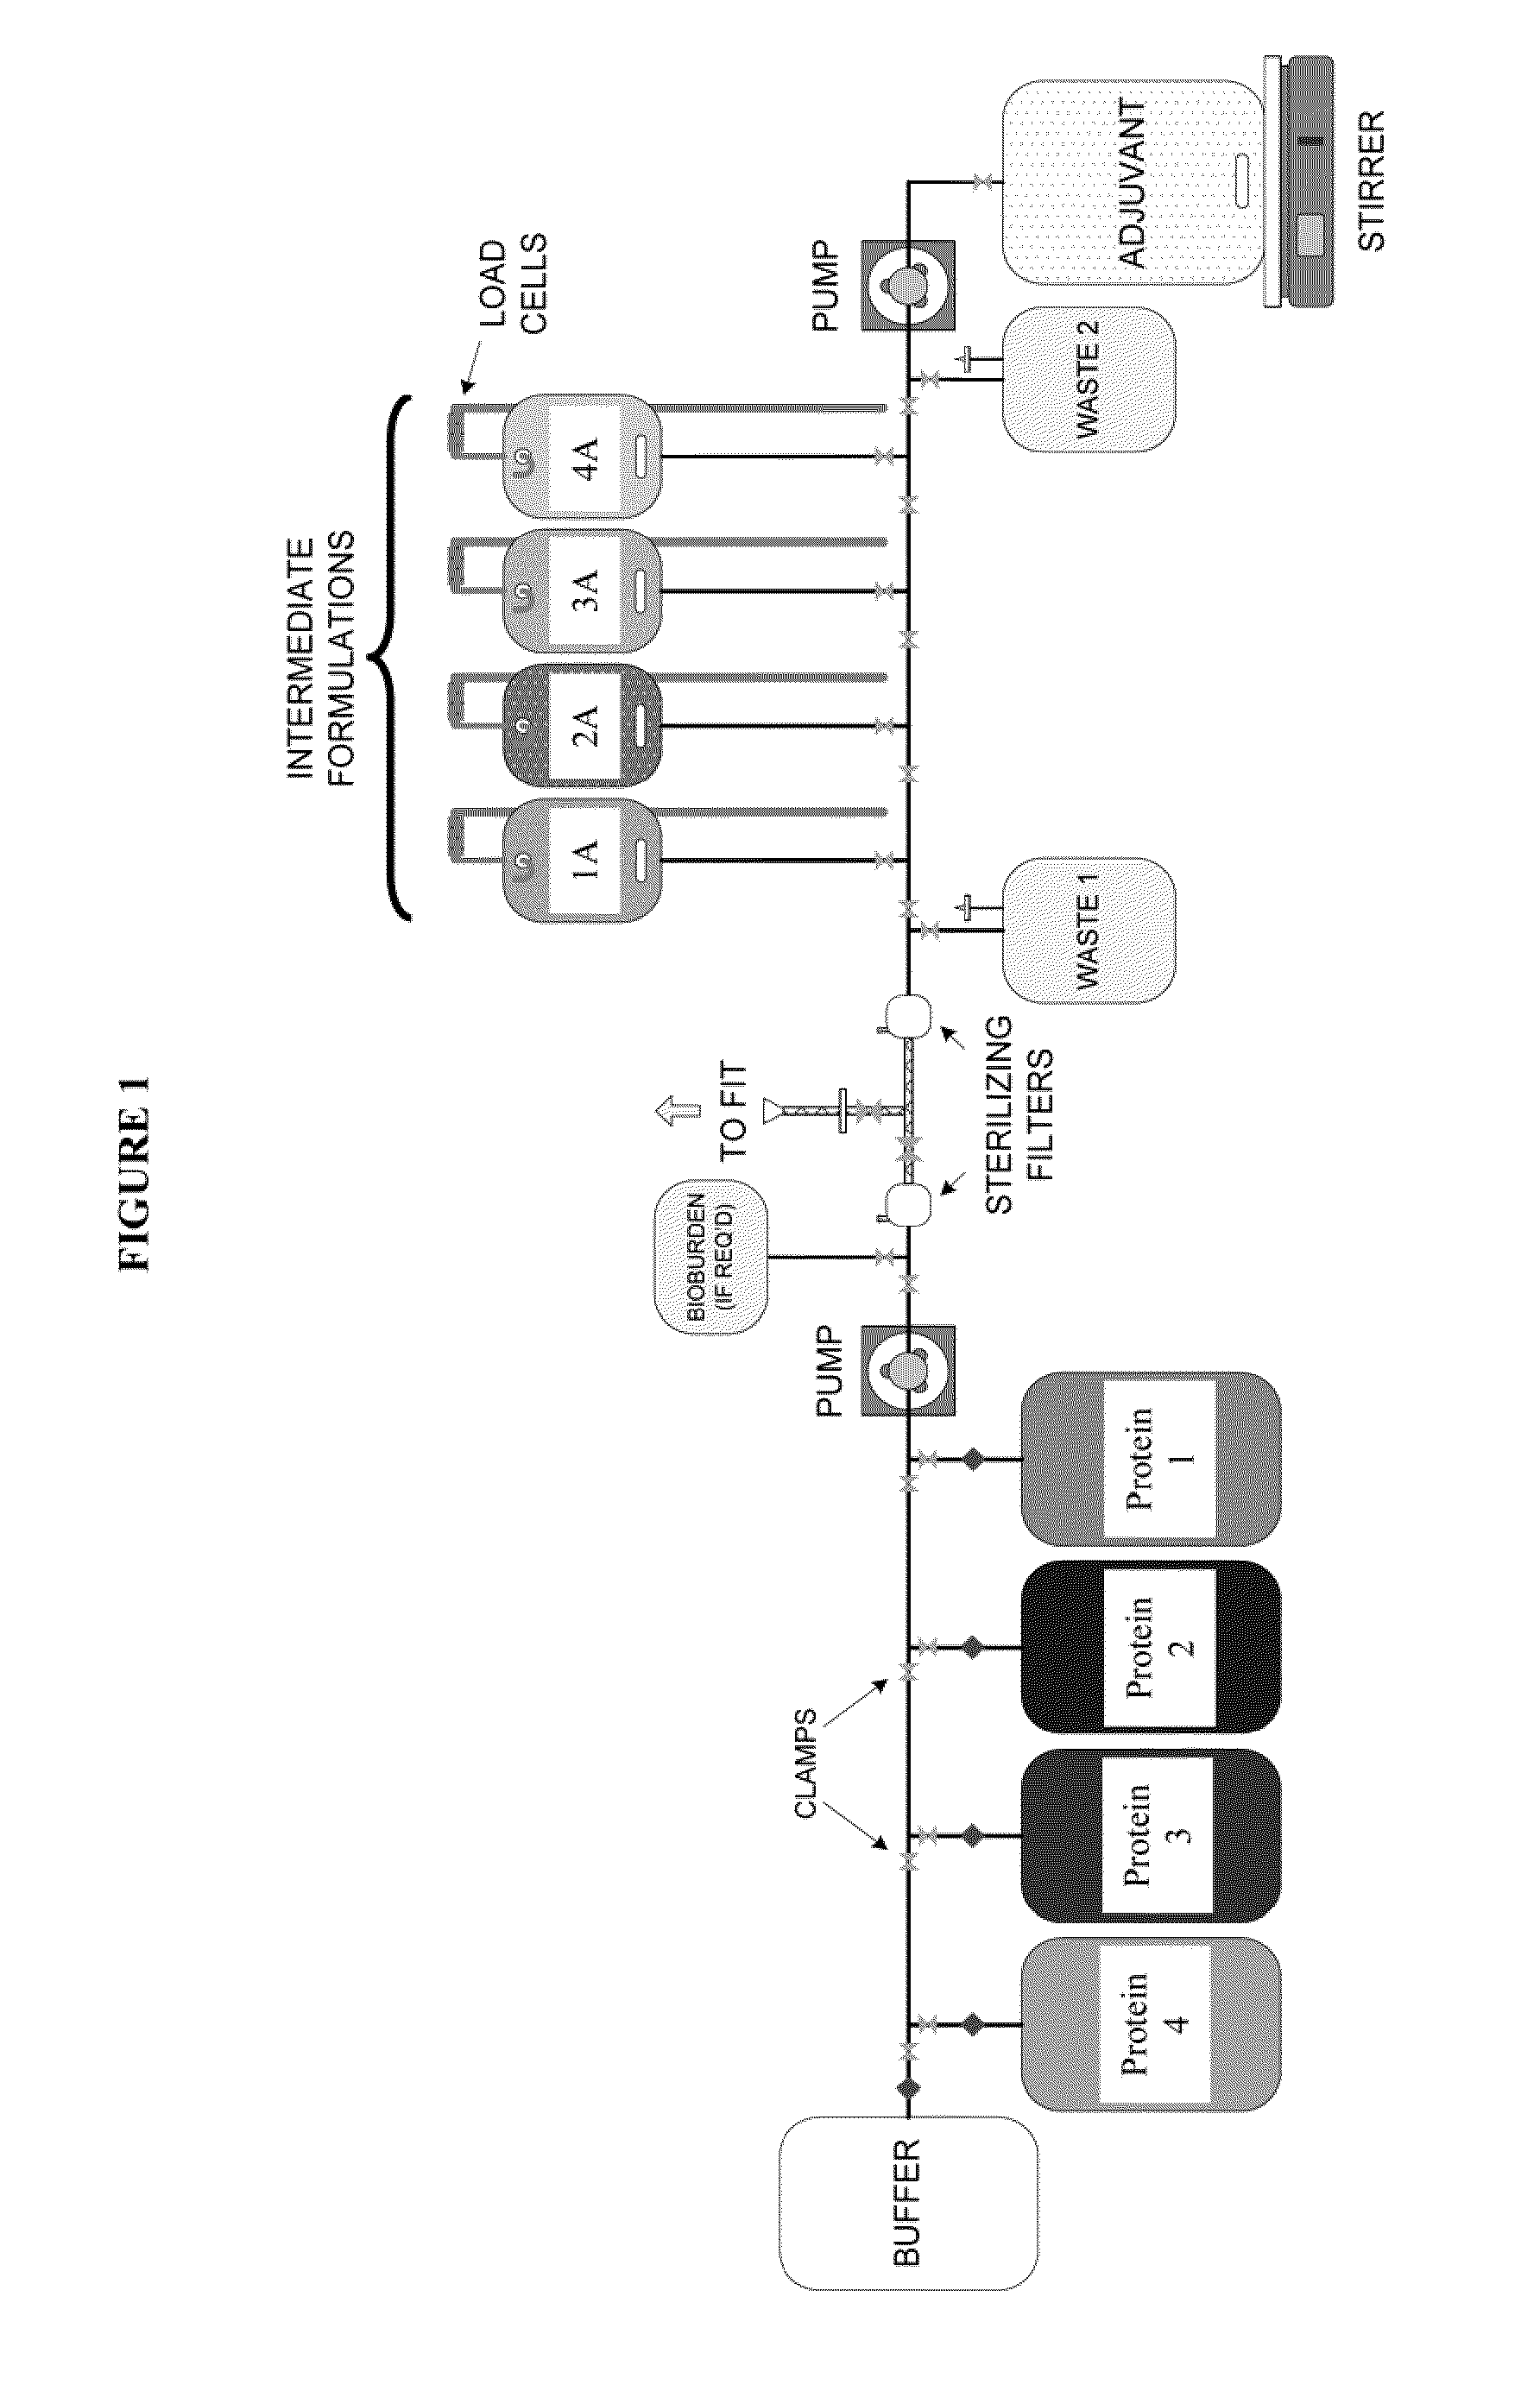 System and process for producing multi-component biopharmaceuticals